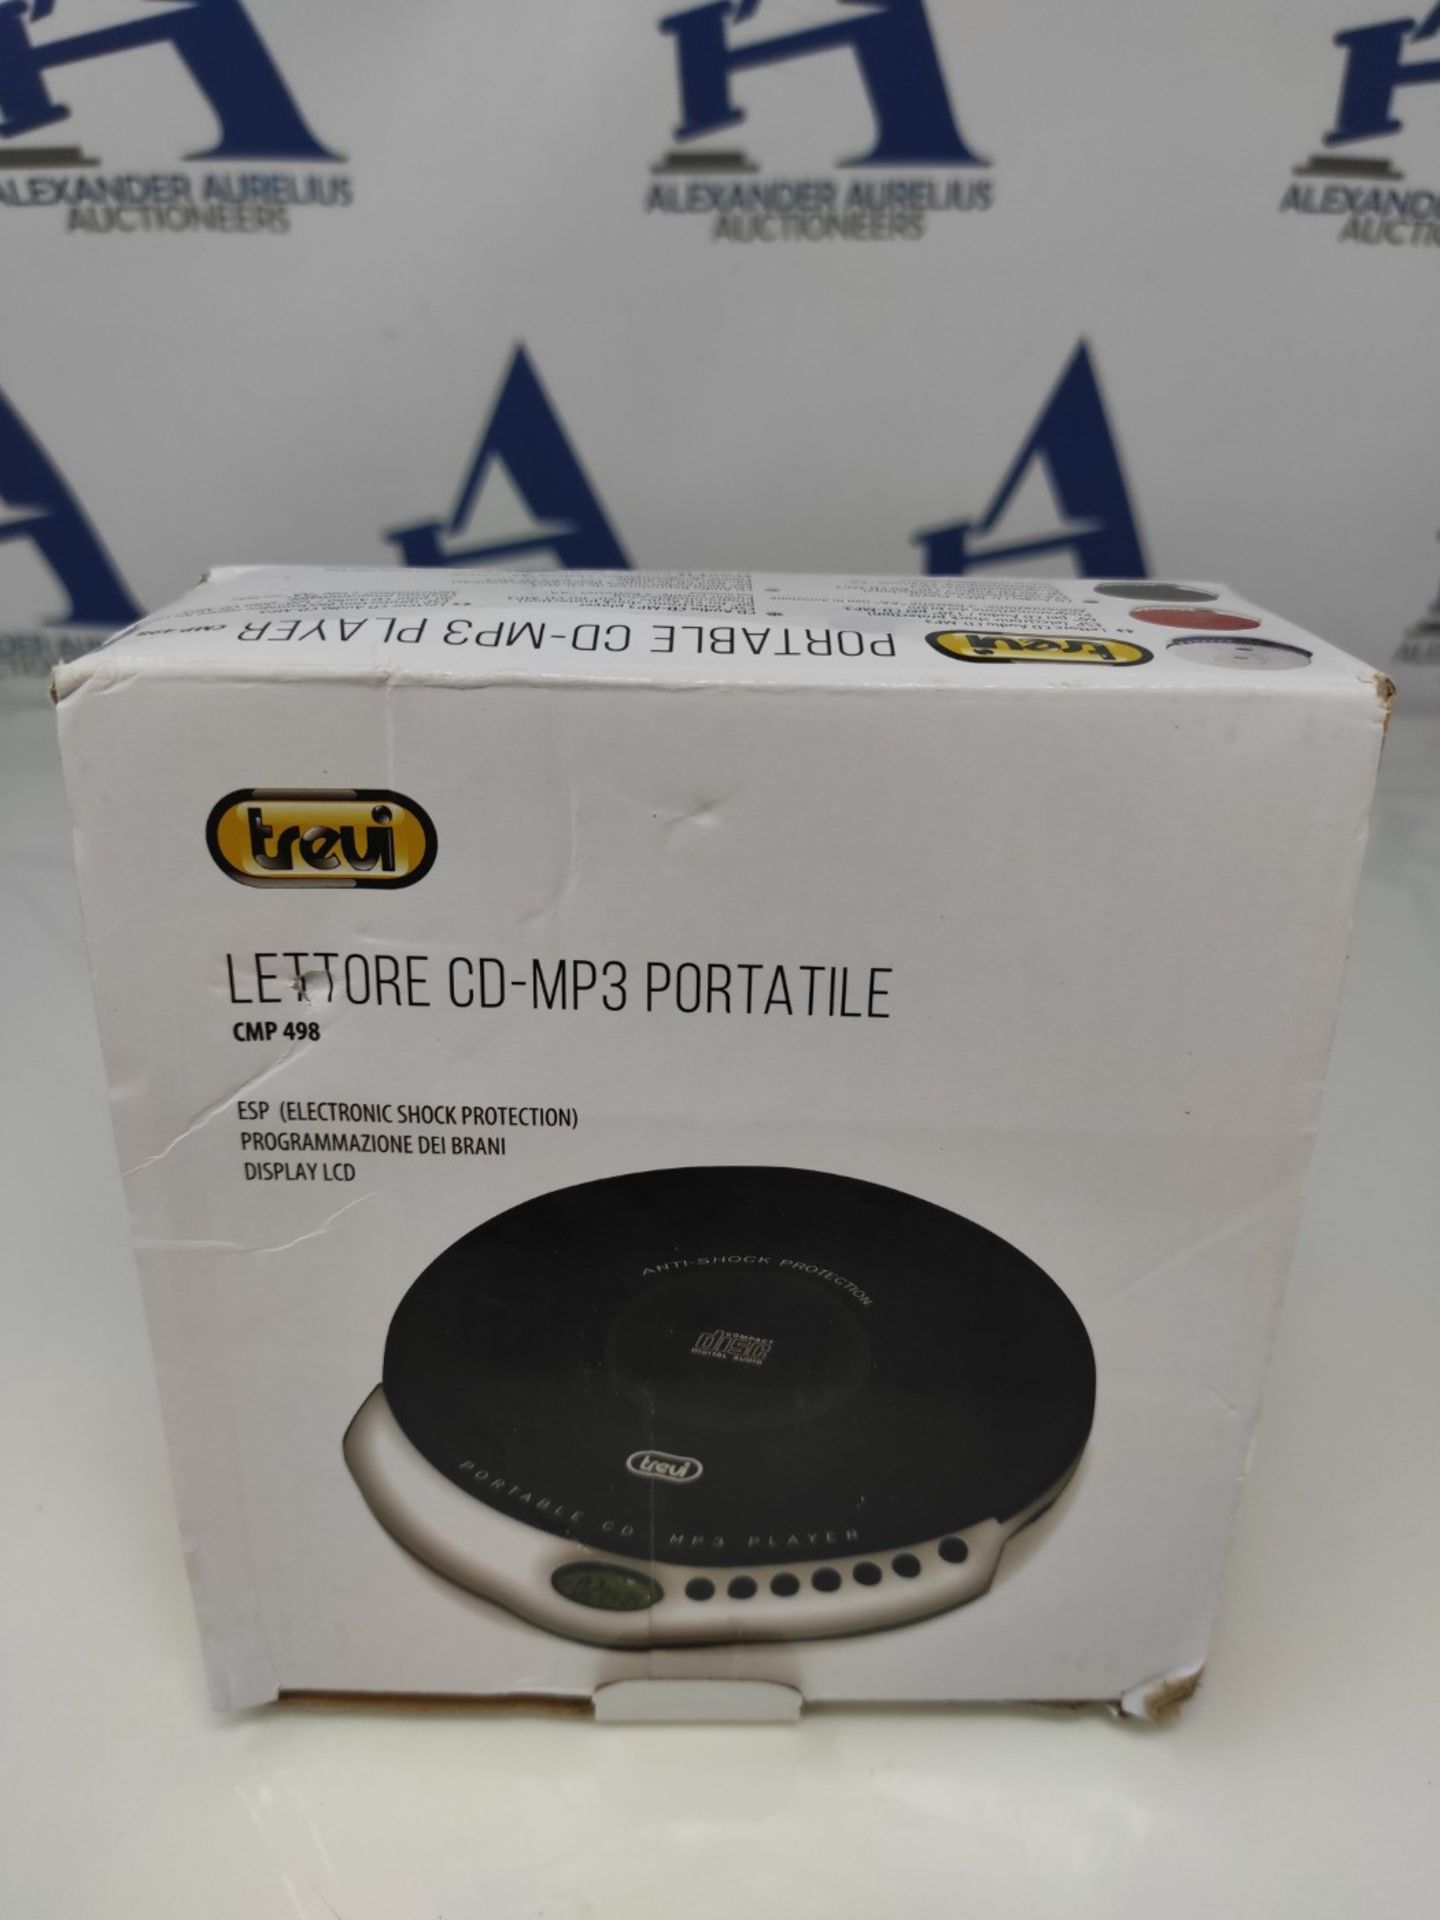 Trevi - Portable CD Player - Image 5 of 6